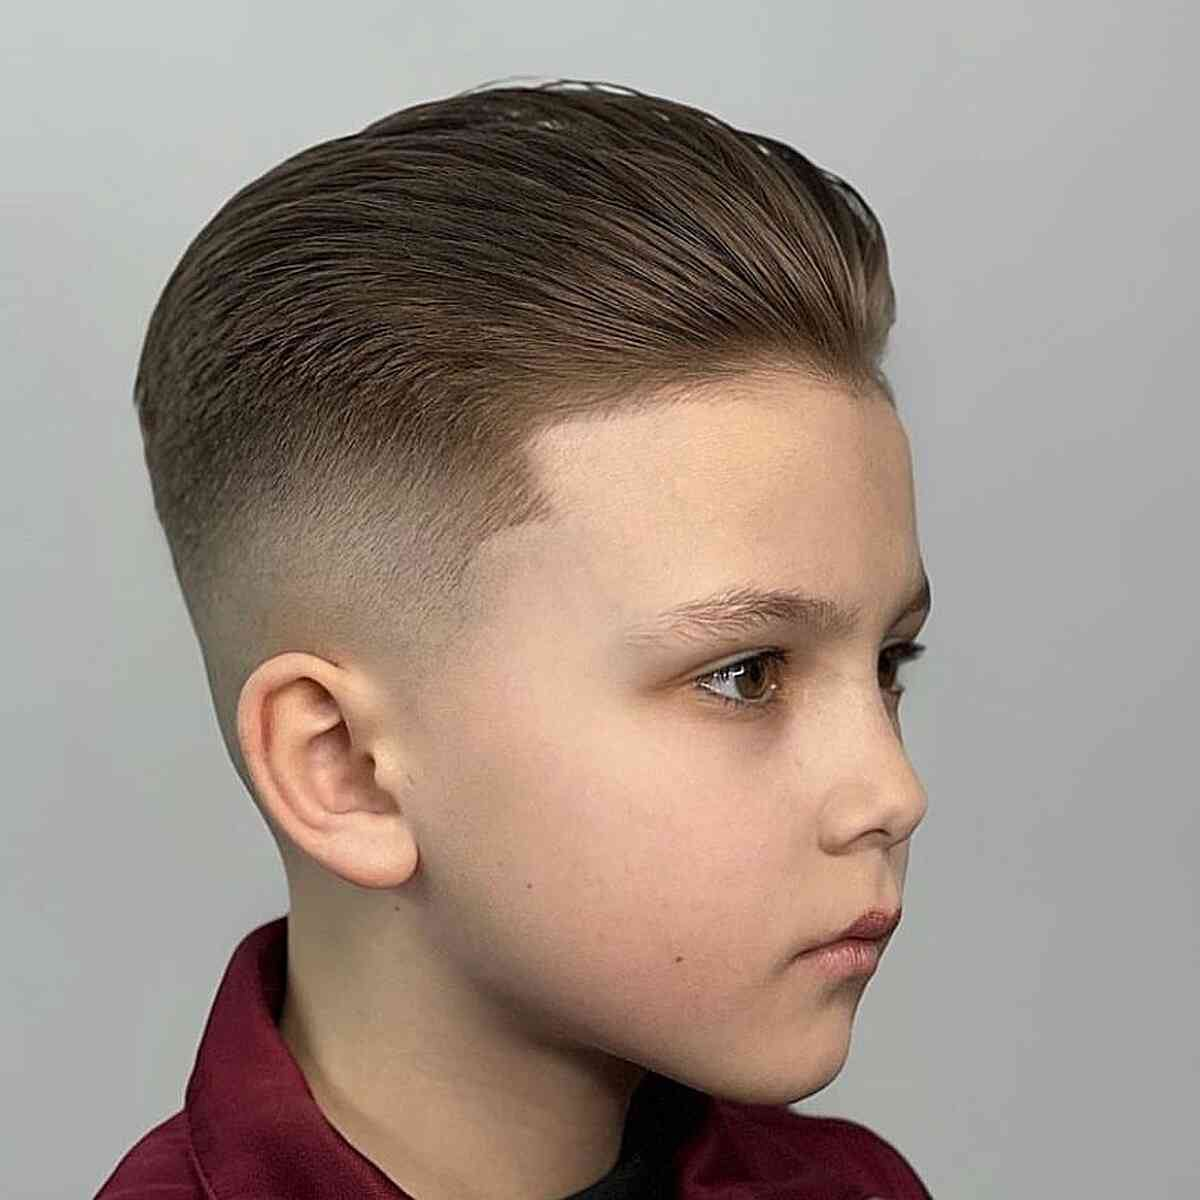 Side view of a young boy rocking the slicked back hairstyle